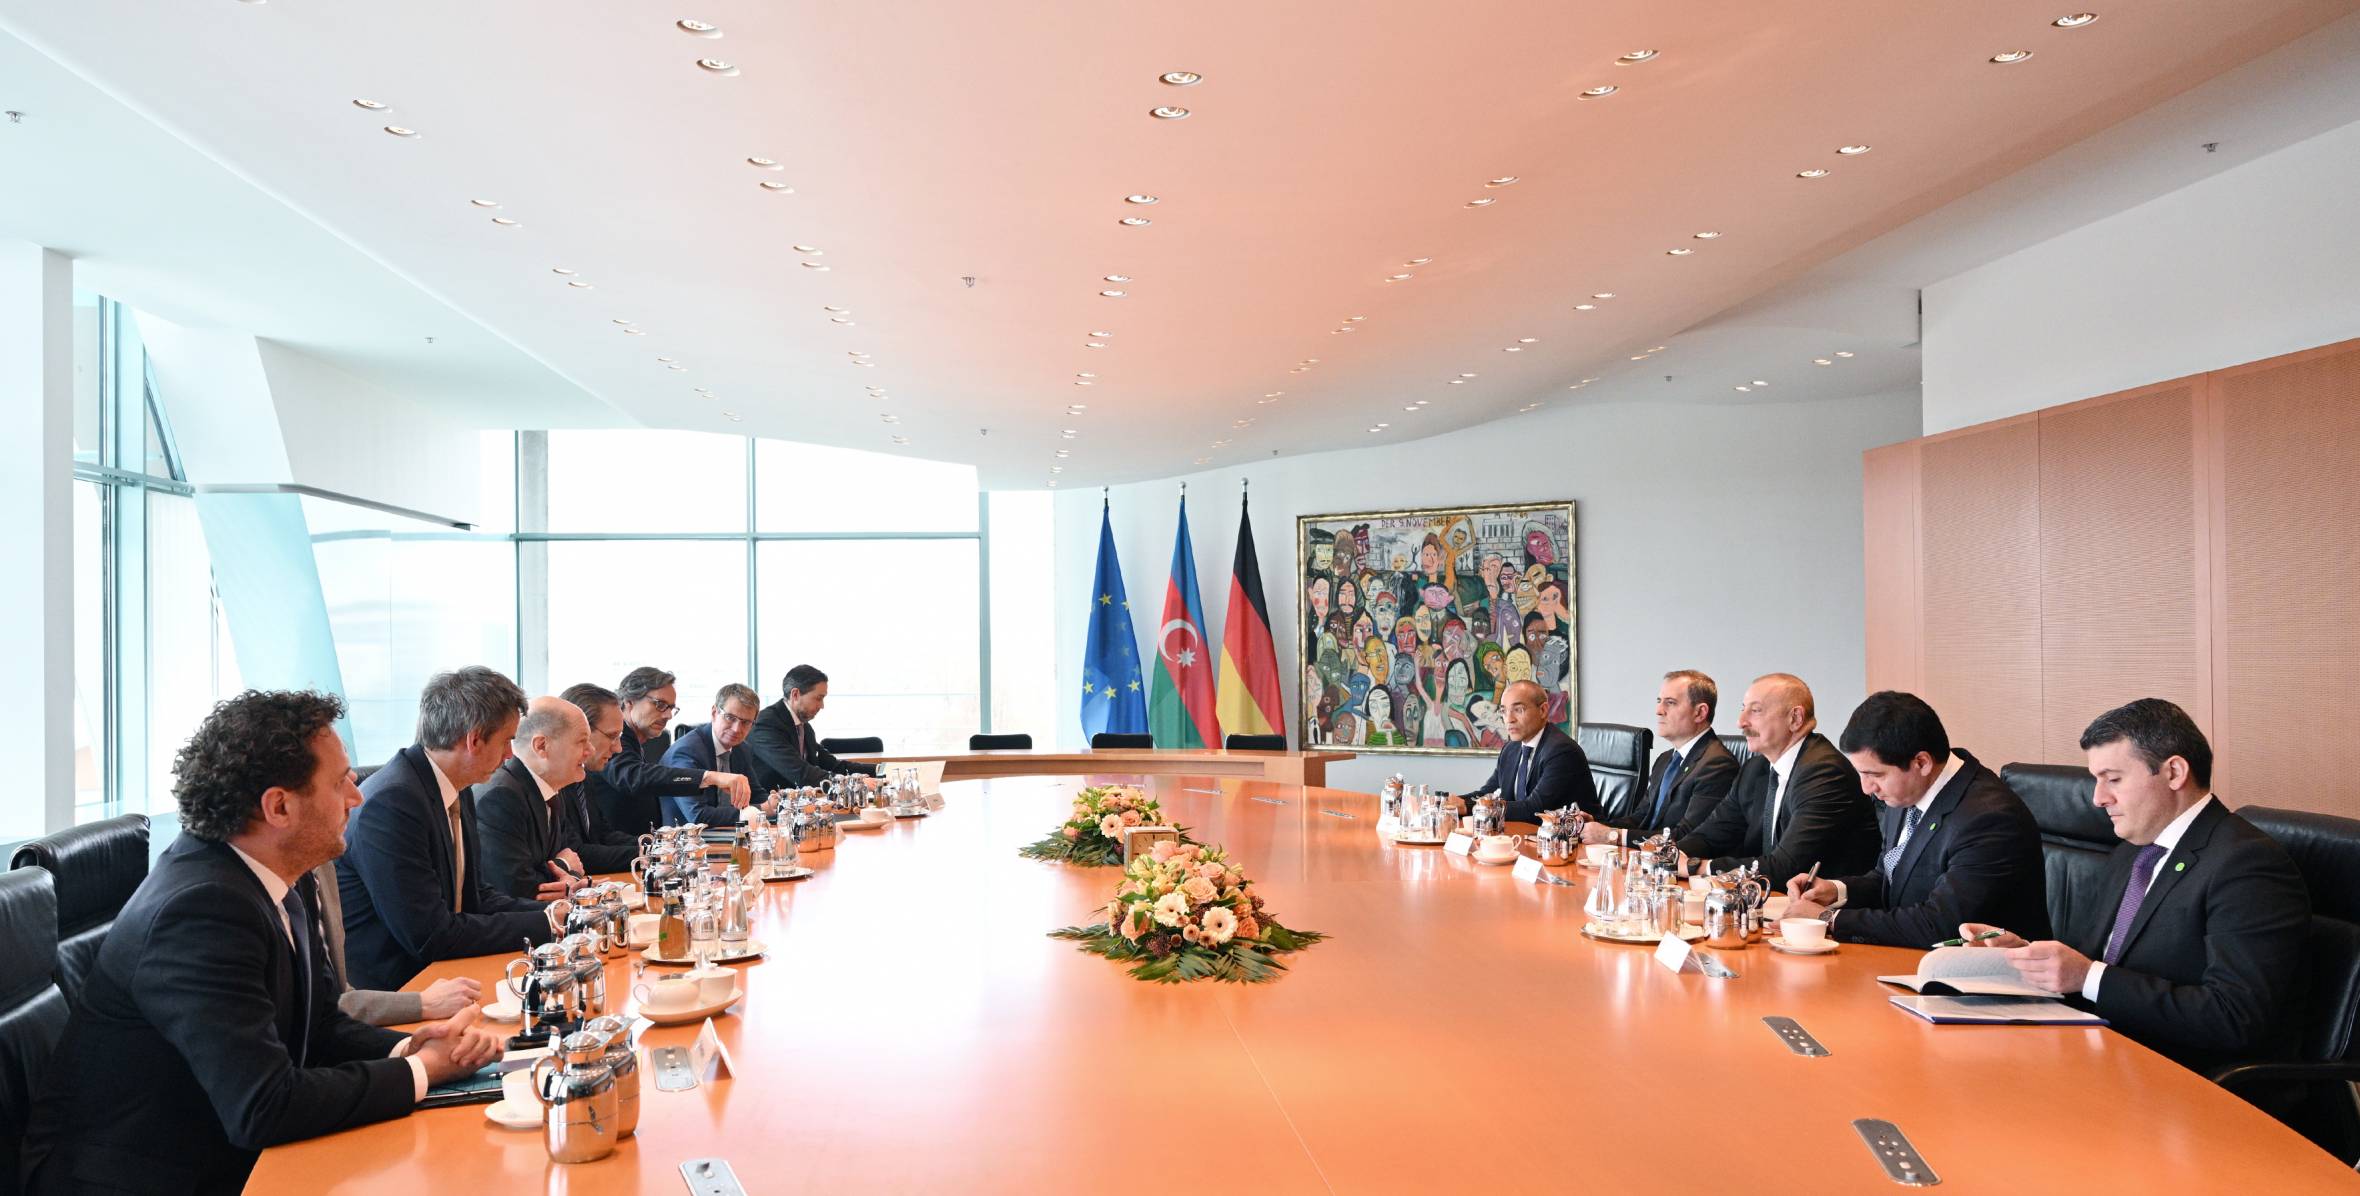 Ilham Aliyev held expanded meeting with Chancellor of Germany Olaf Scholz in Berlin